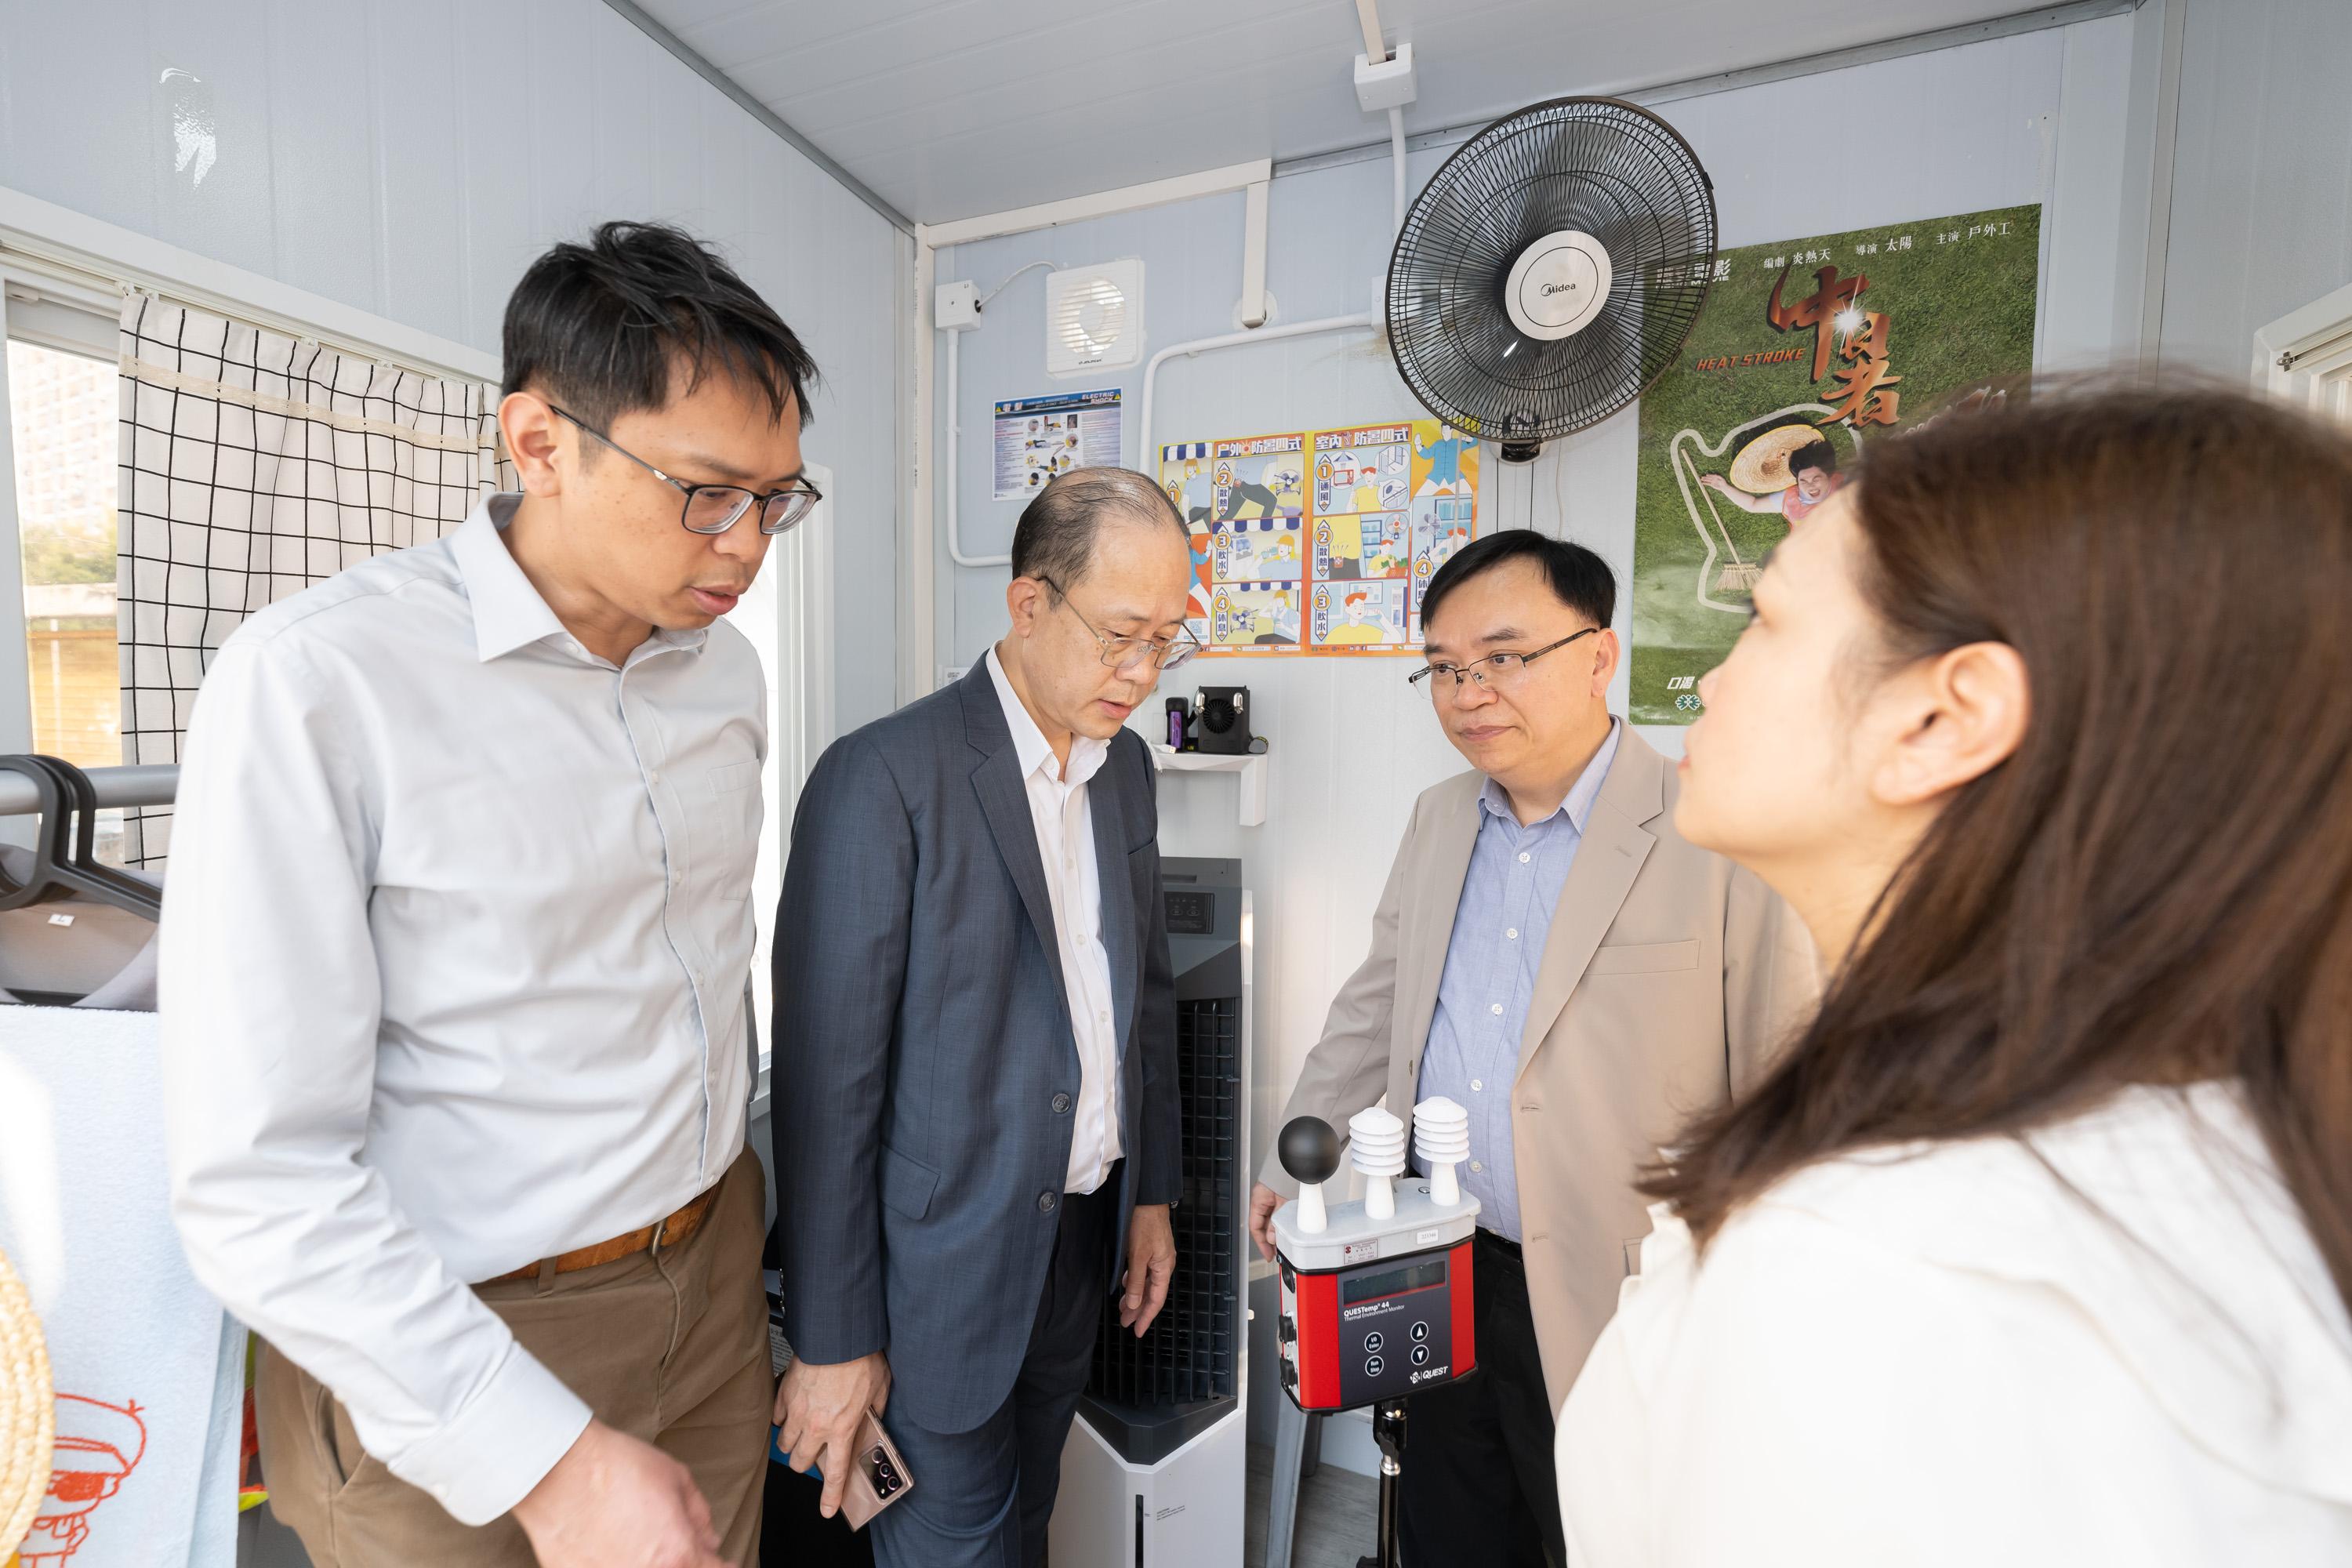 The Legislative Council (LegCo) Panel on Manpower visits the Occupational Safety and Health Academy today (May 30). Photo shows the Chairman of the Panel, Mr Luk Chung-hung (first left), and other LegCo Members visiting the Solar Cooling Kiosk.